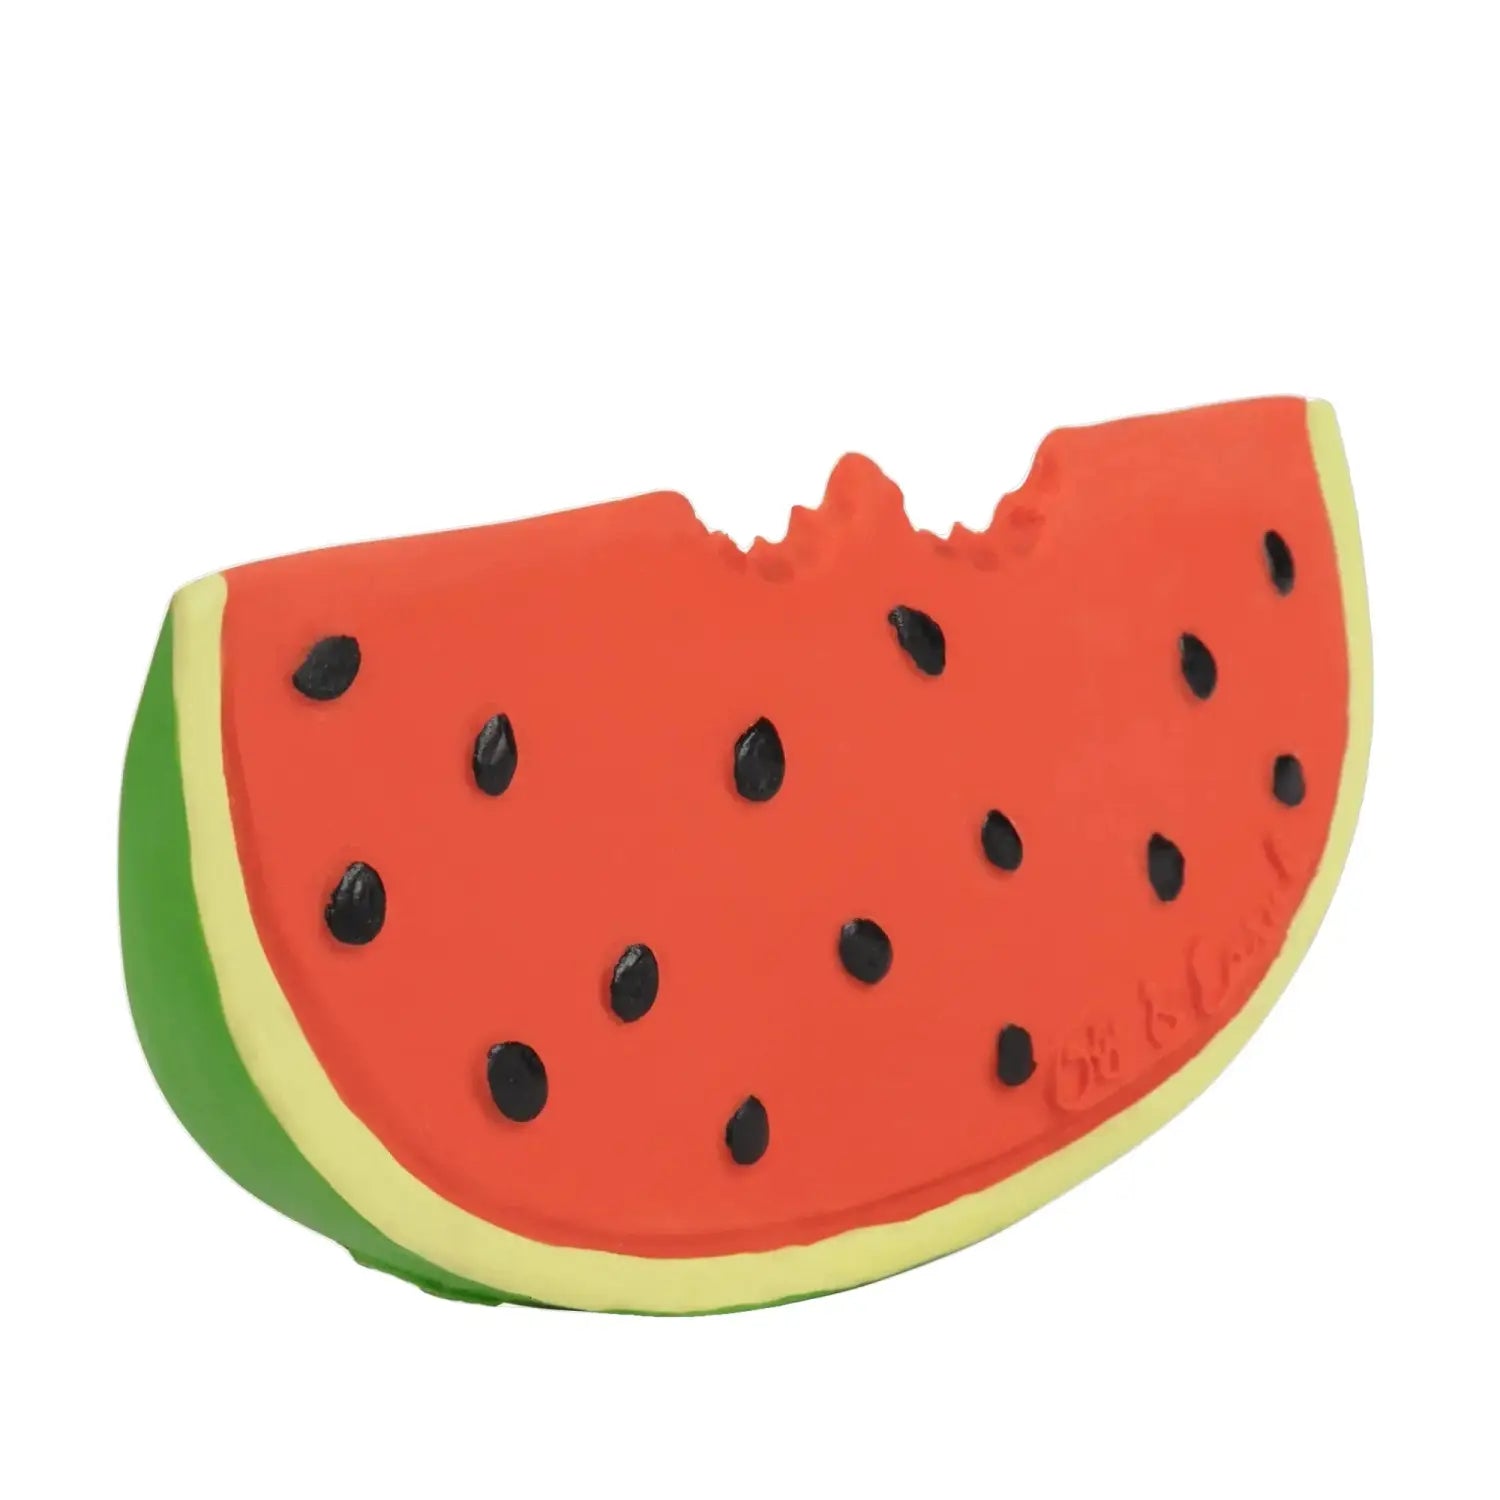 Oli & Carol Fruit & Veggie Baby Teether Toy - Wally the Watermelon. Red, green and black colored watermelon teether.